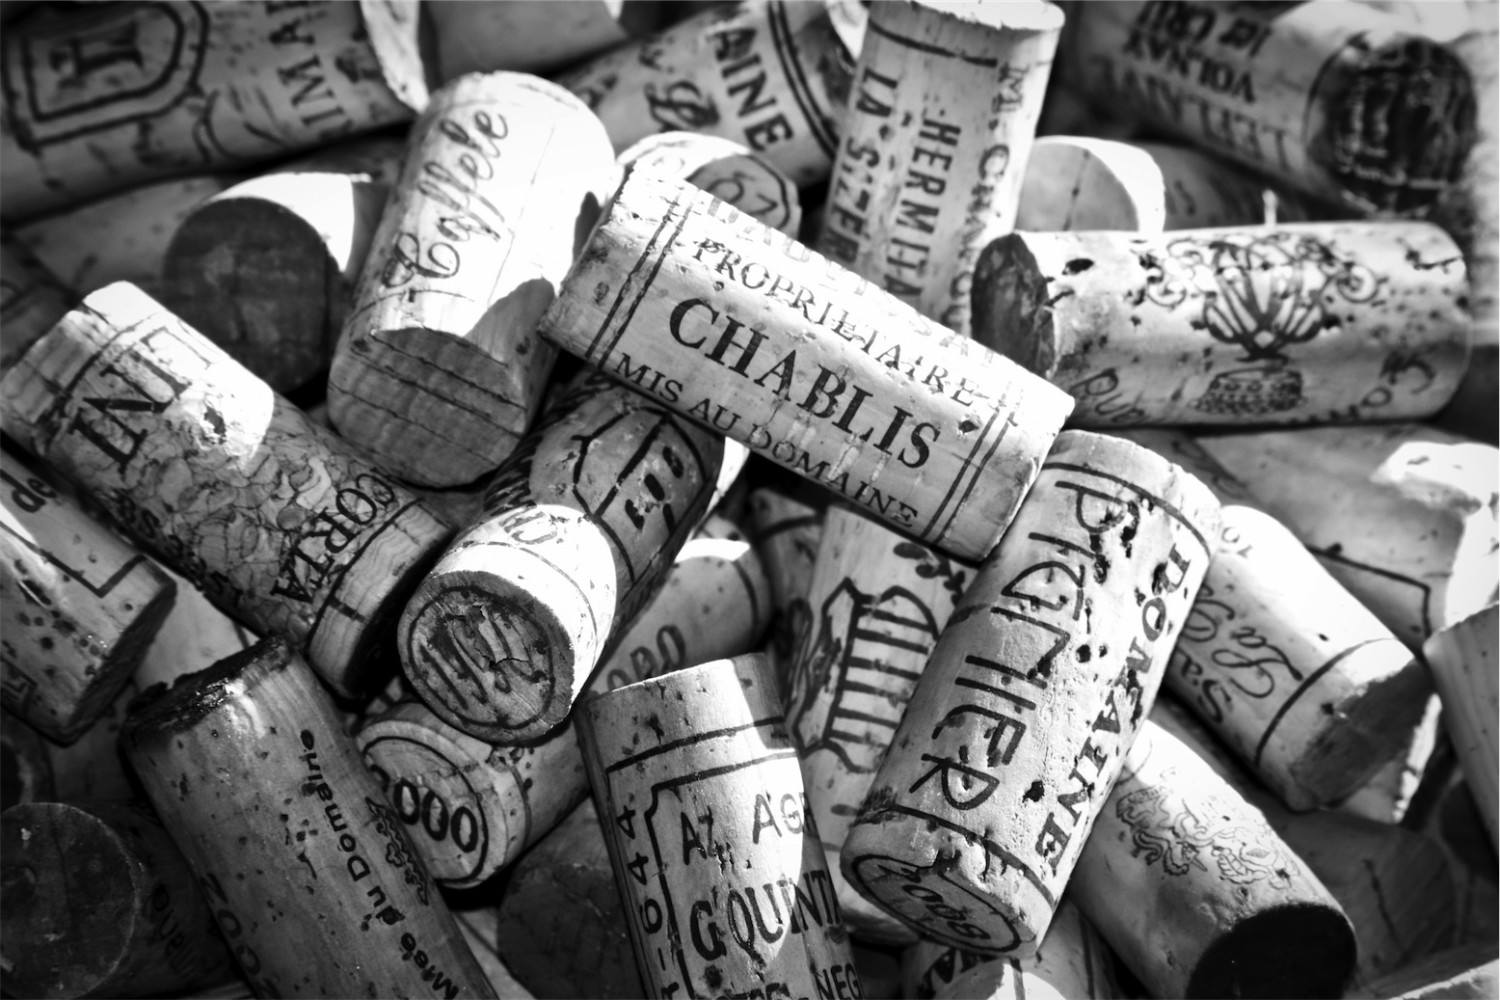 Corks Out! DIAM Bouchage fight back